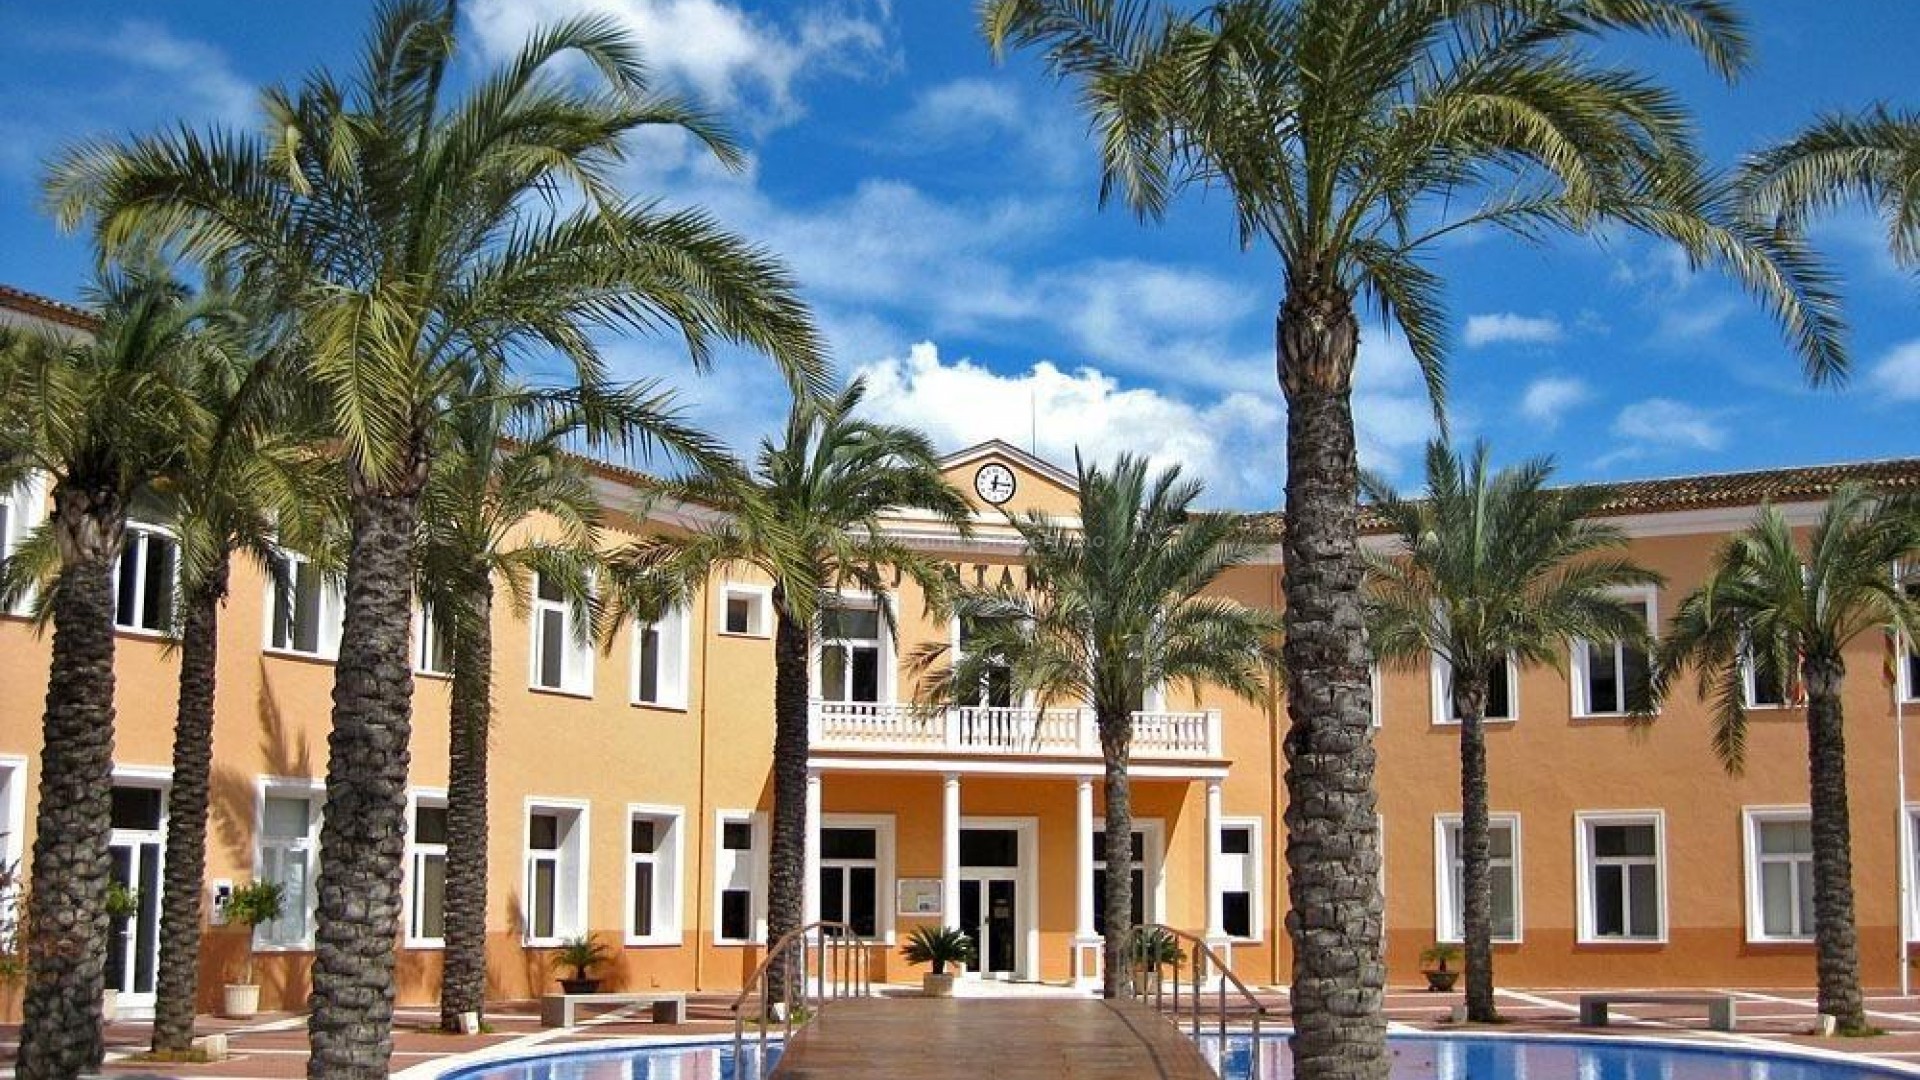 29 new apartments in Denia, 2/3 bedrooms, 2 bathrooms, shared pool, garden or solarium, parking, unbeatable location 100 meters from beaches, 2 km to the center